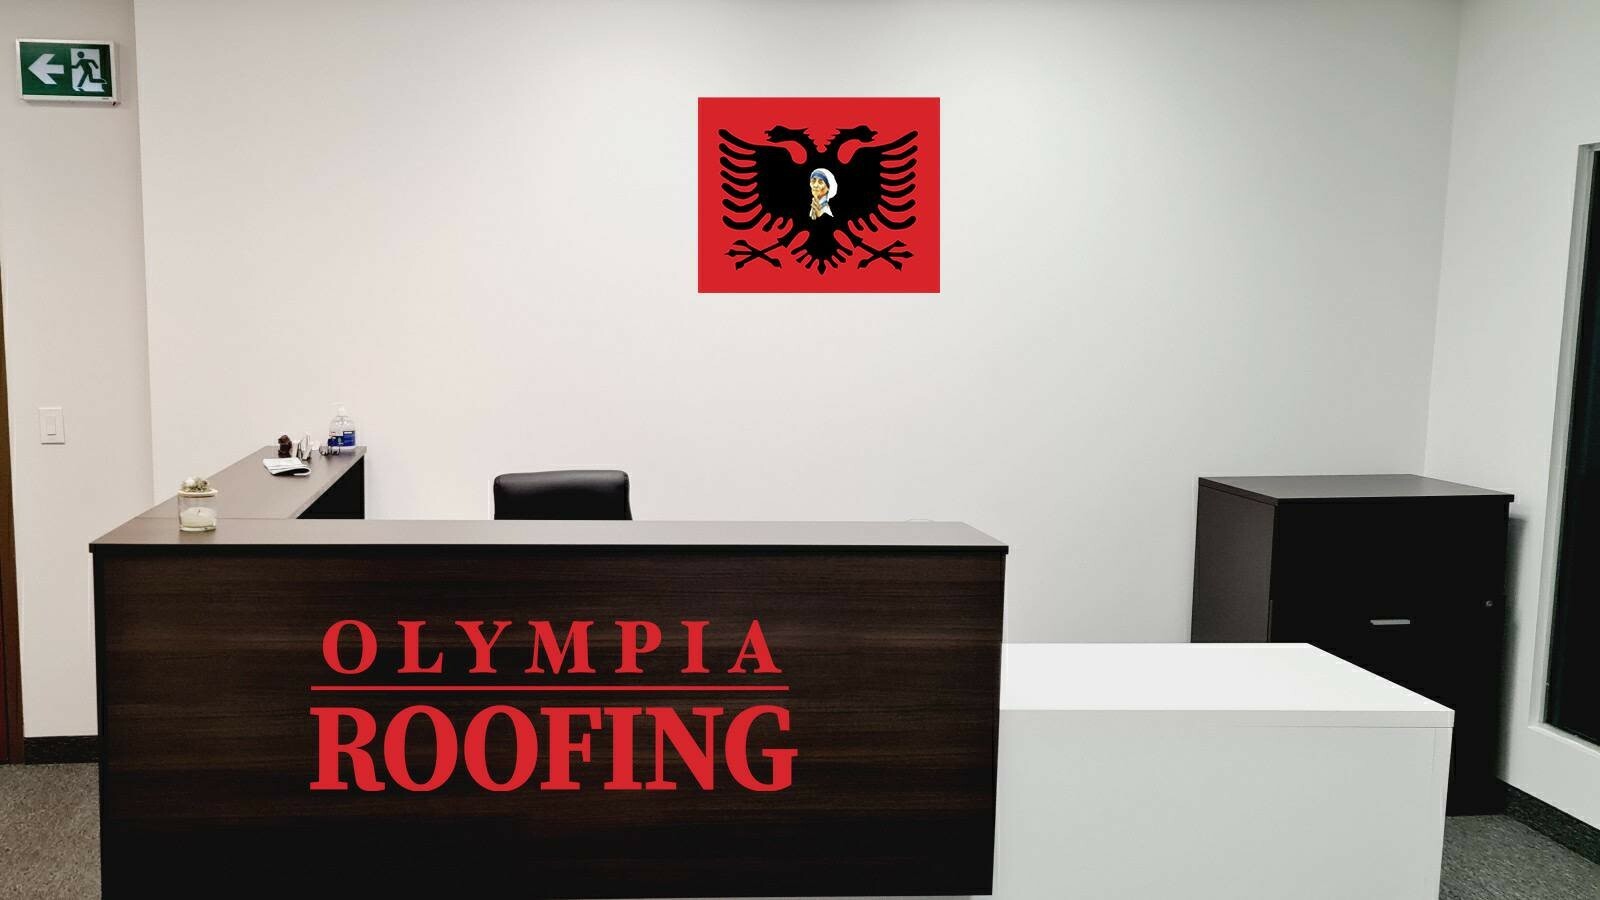 Olympia Roofing Inc's logo